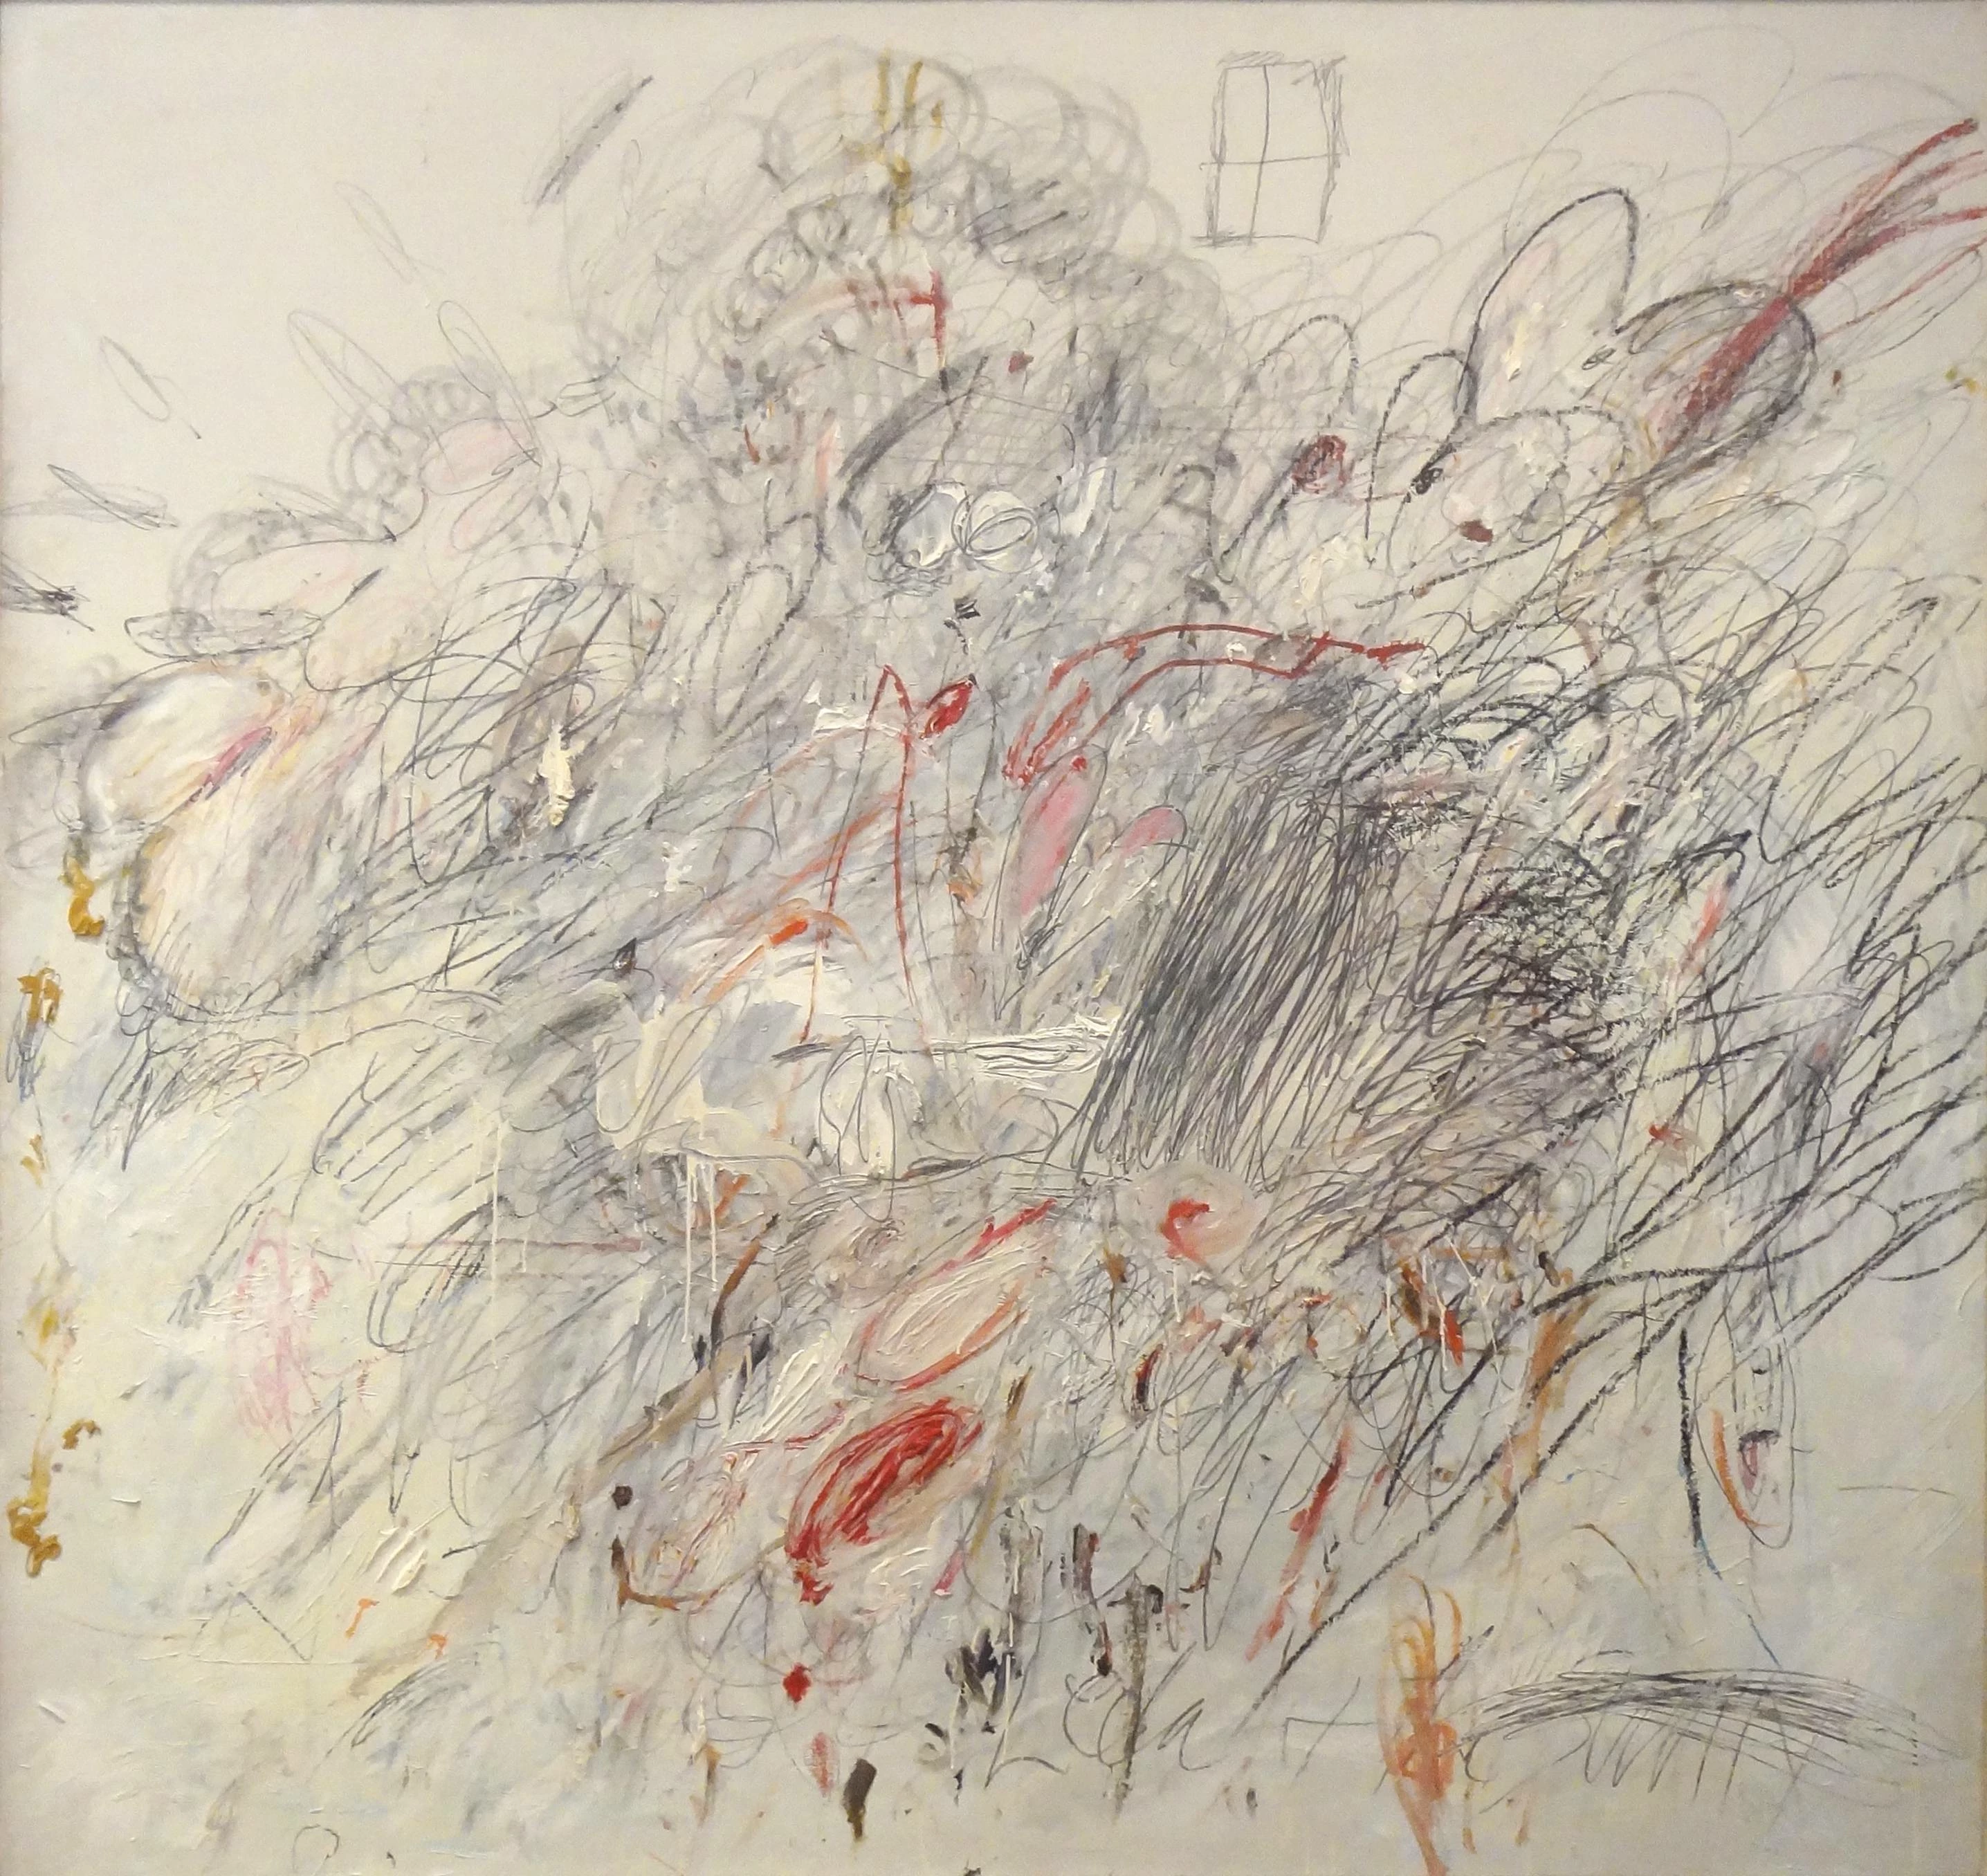 Leda and the Swan, Cy Twombly